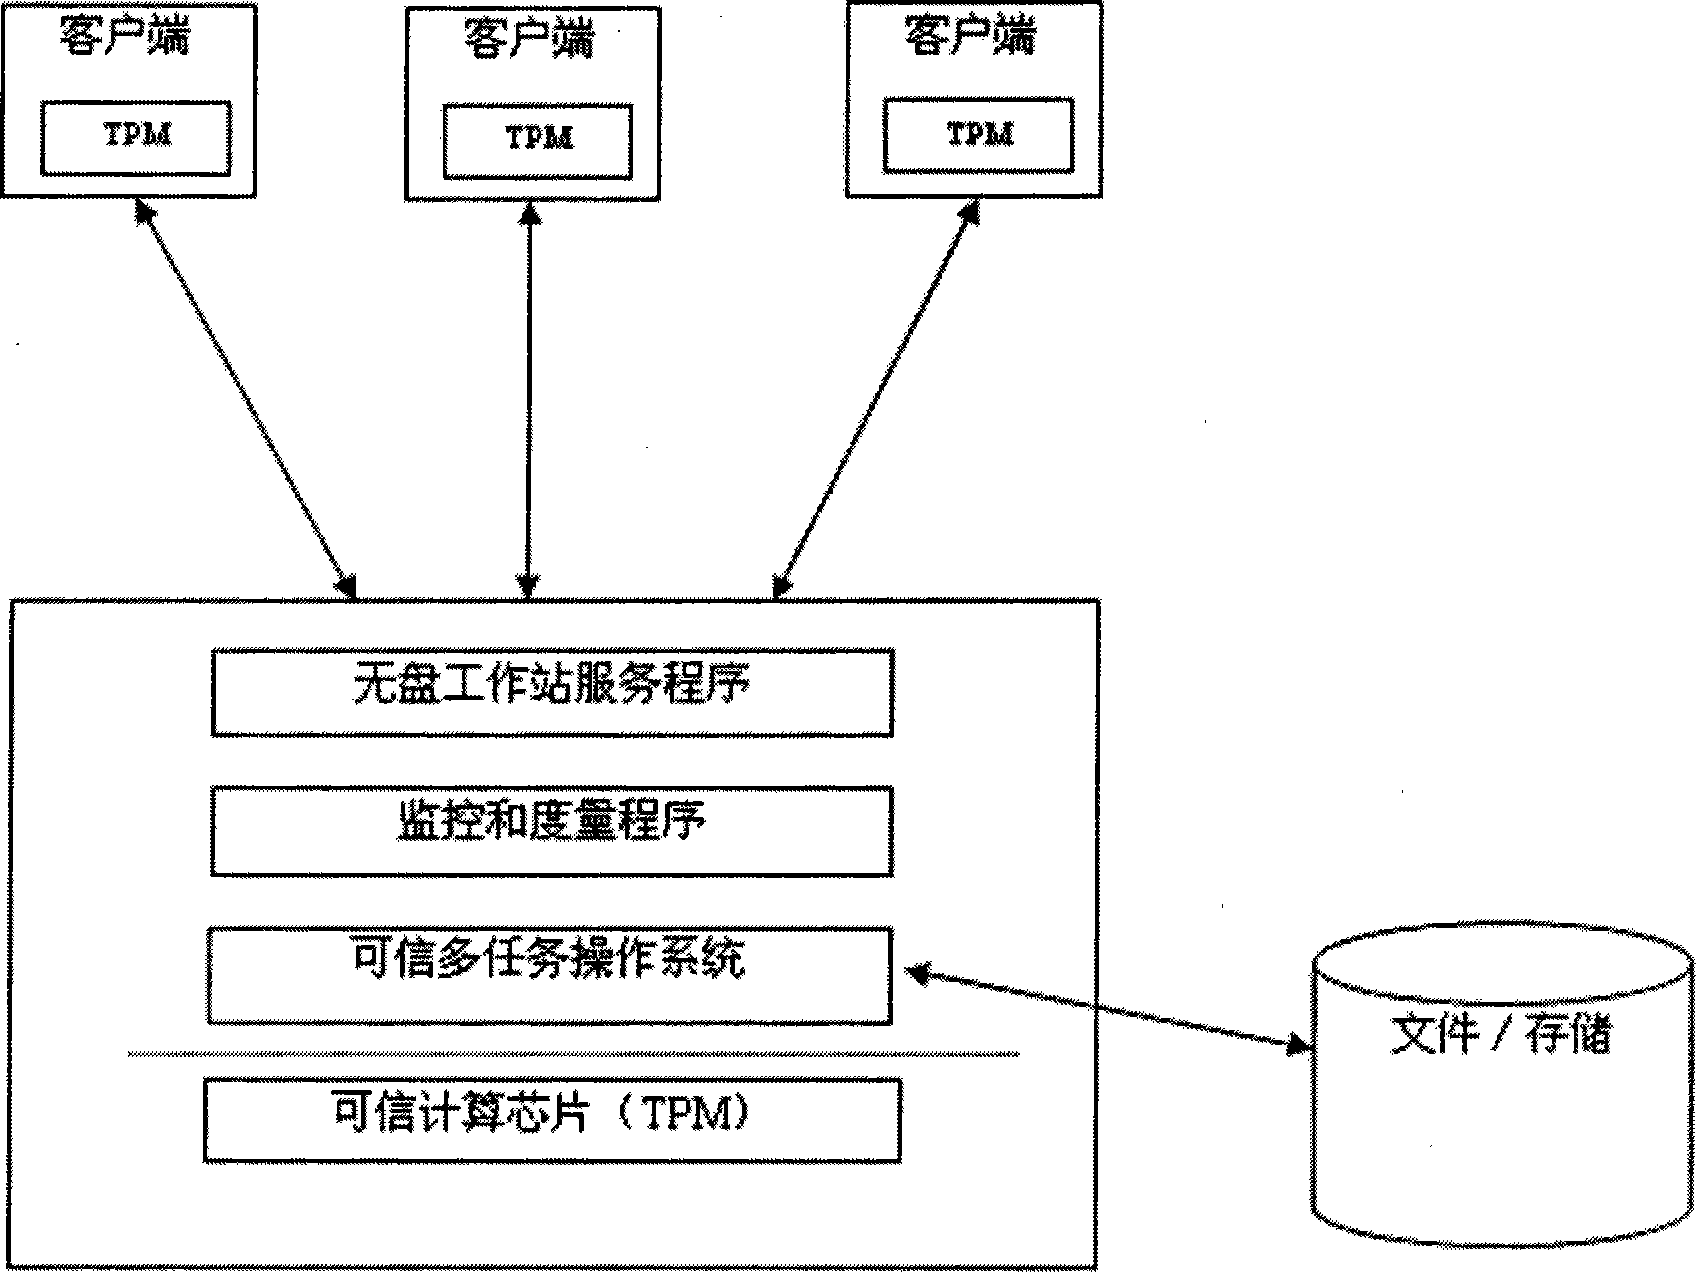 Method for implementing reliable network system based on reliable computation